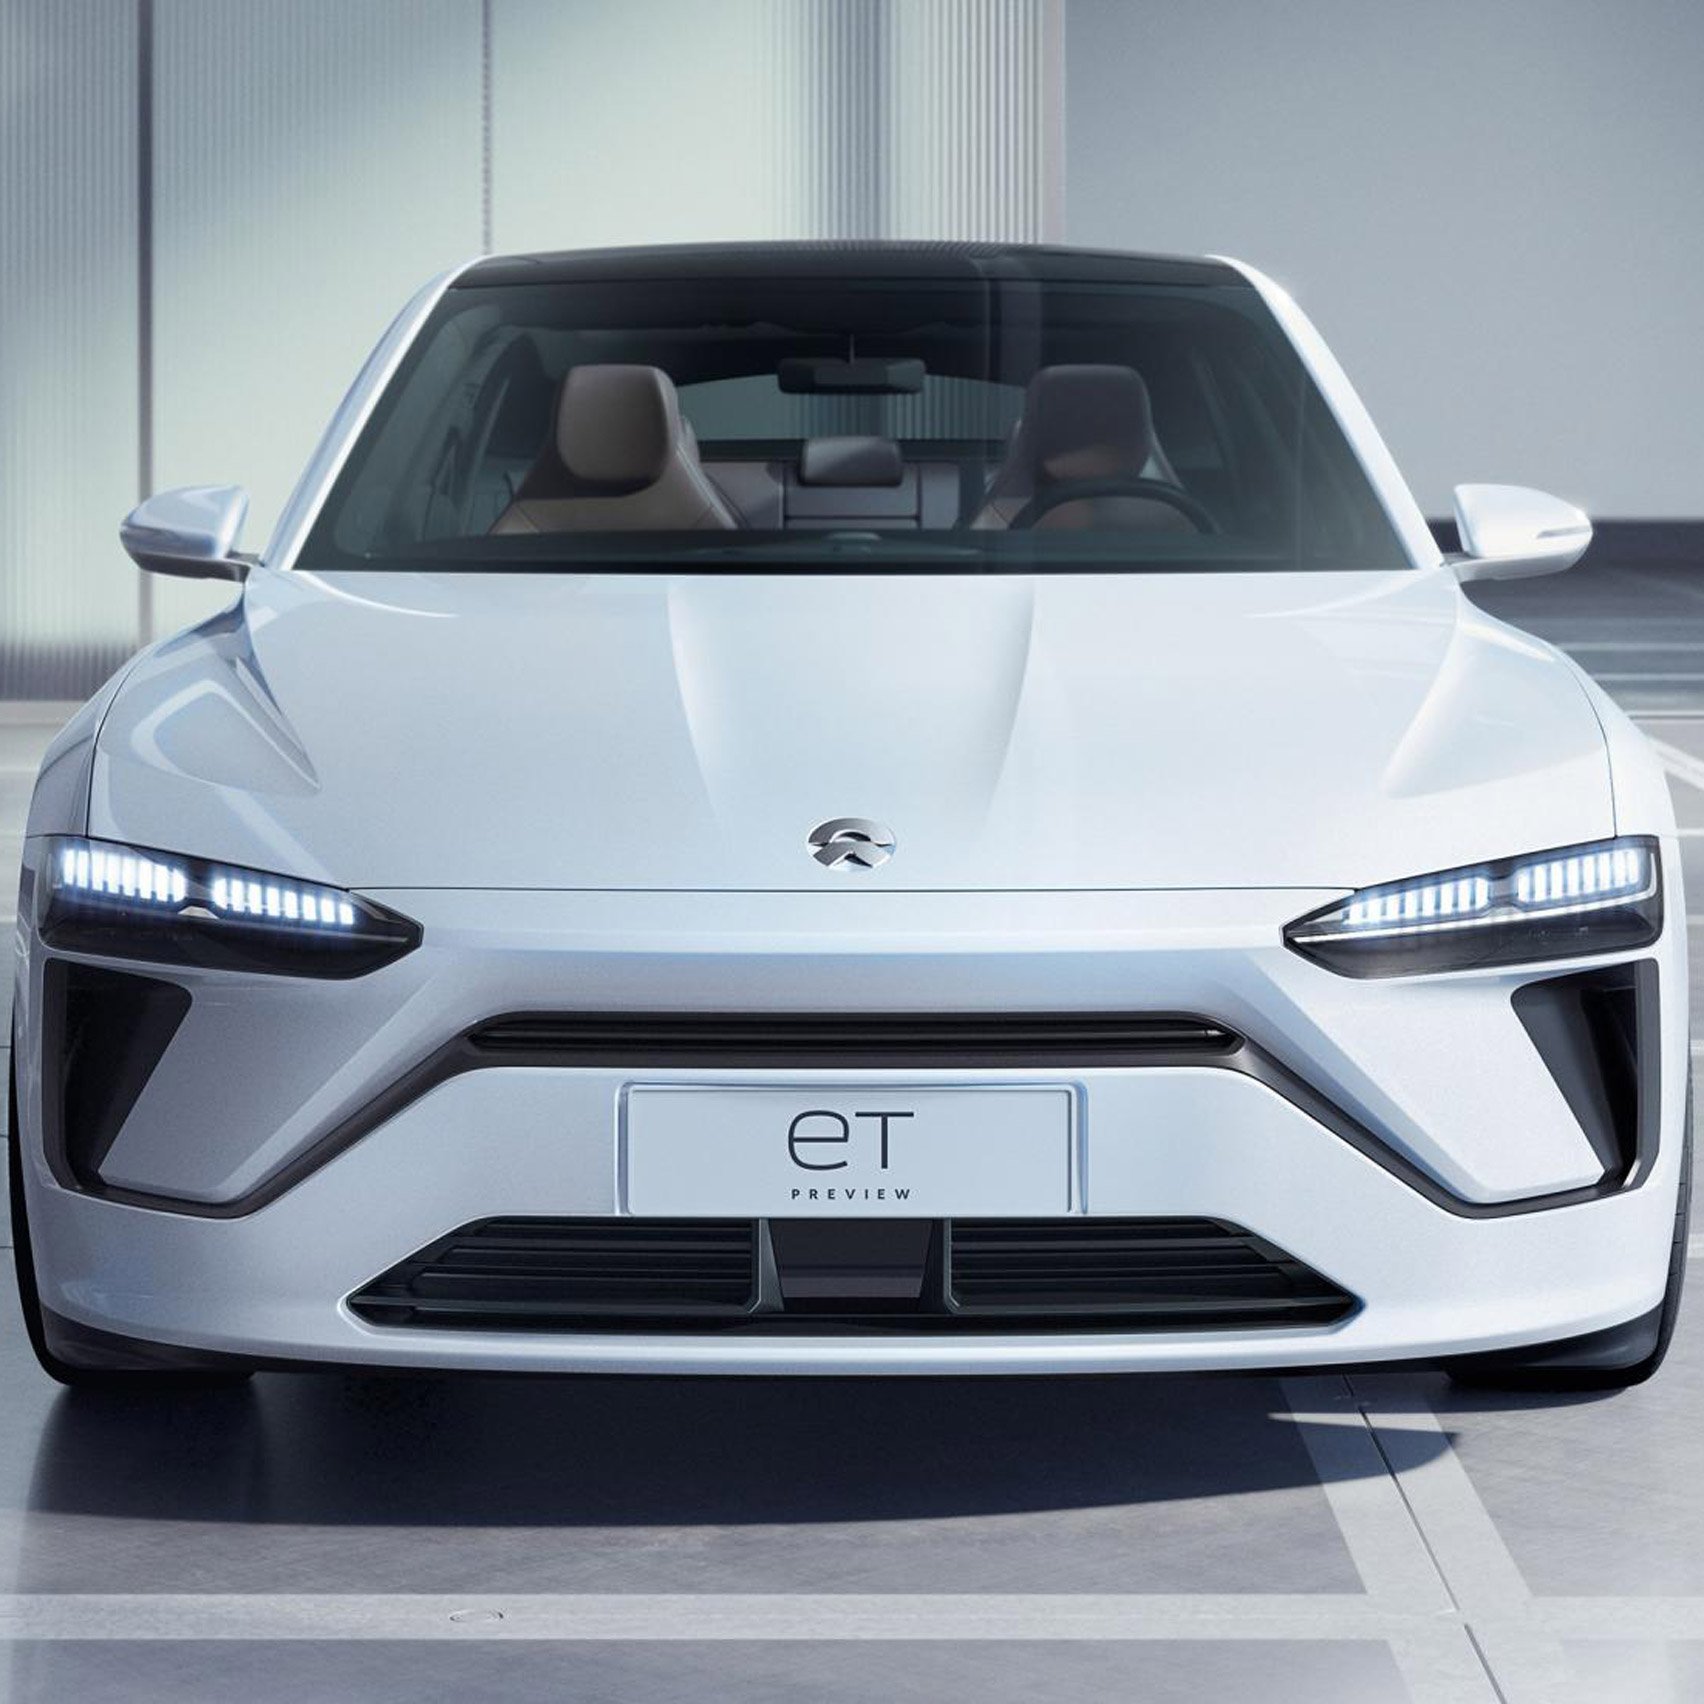 10 electric cars by Chinese car companies at Auto Shanghai 2019: ET Preview by NIO